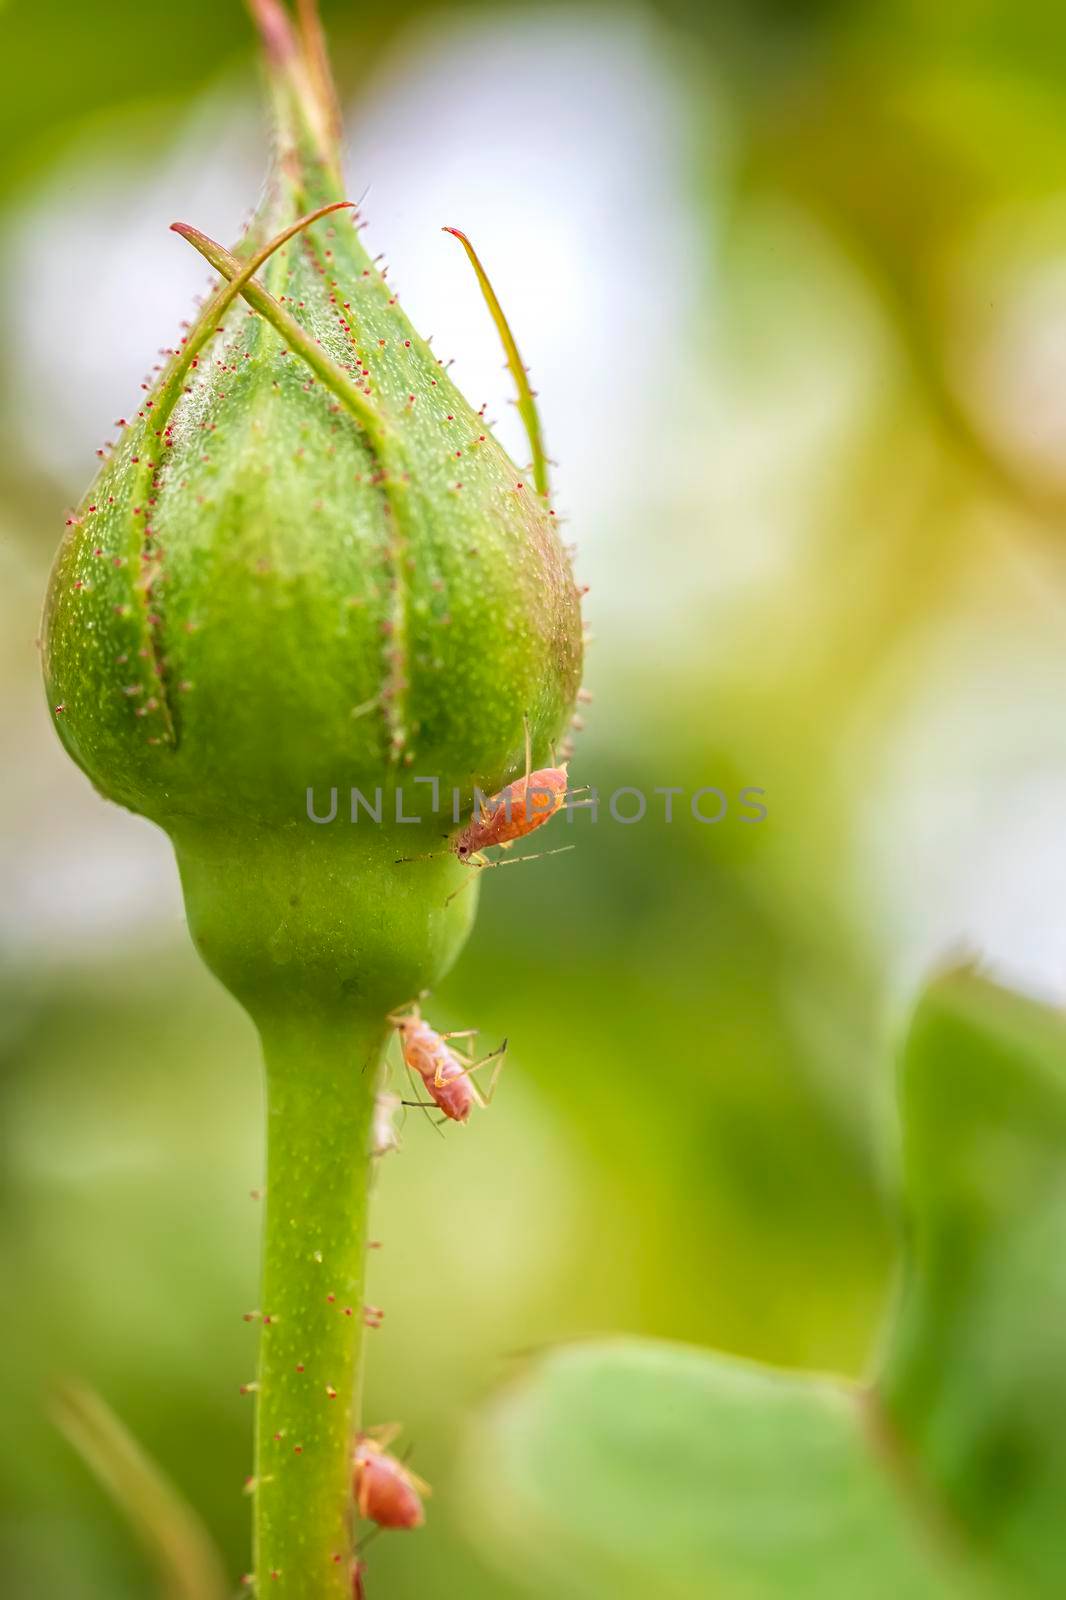 Aphids on a rose bud in nature. Close up. Vertical view